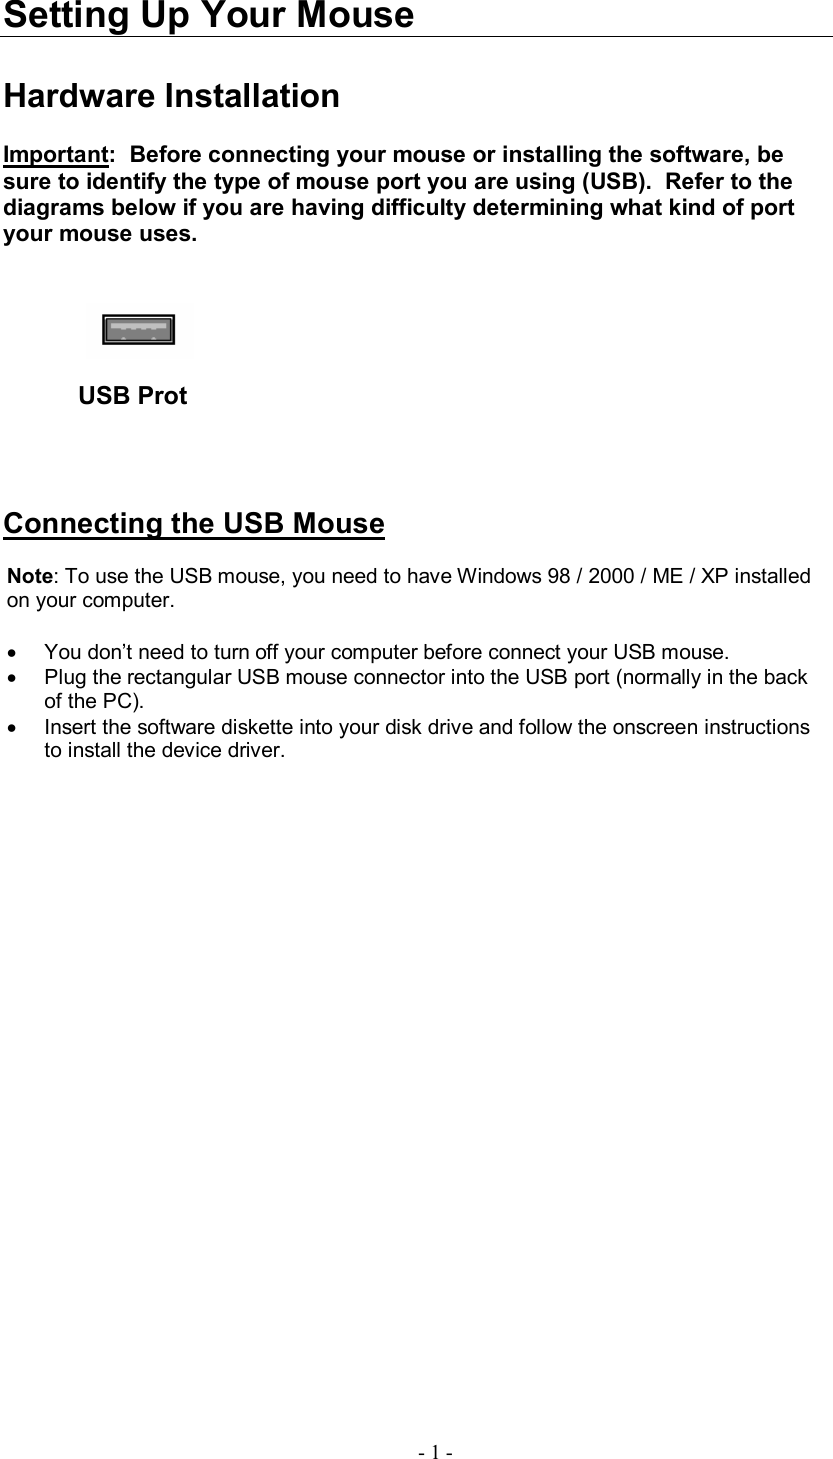  - 1 - Setting Up Your Mouse  Hardware Installation  Important:  Before connecting your mouse or installing the software, be sure to identify the type of mouse port you are using (USB).  Refer to the diagrams below if you are having difficulty determining what kind of port your mouse uses.             USB Prot     Connecting the USB Mouse  Note: To use the USB mouse, you need to have Windows 98 / 2000 / ME / XP installed on your computer.  · You don’t need to turn off your computer before connect your USB mouse. · Plug the rectangular USB mouse connector into the USB port (normally in the back of the PC). · Insert the software diskette into your disk drive and follow the onscreen instructions to install the device driver. 